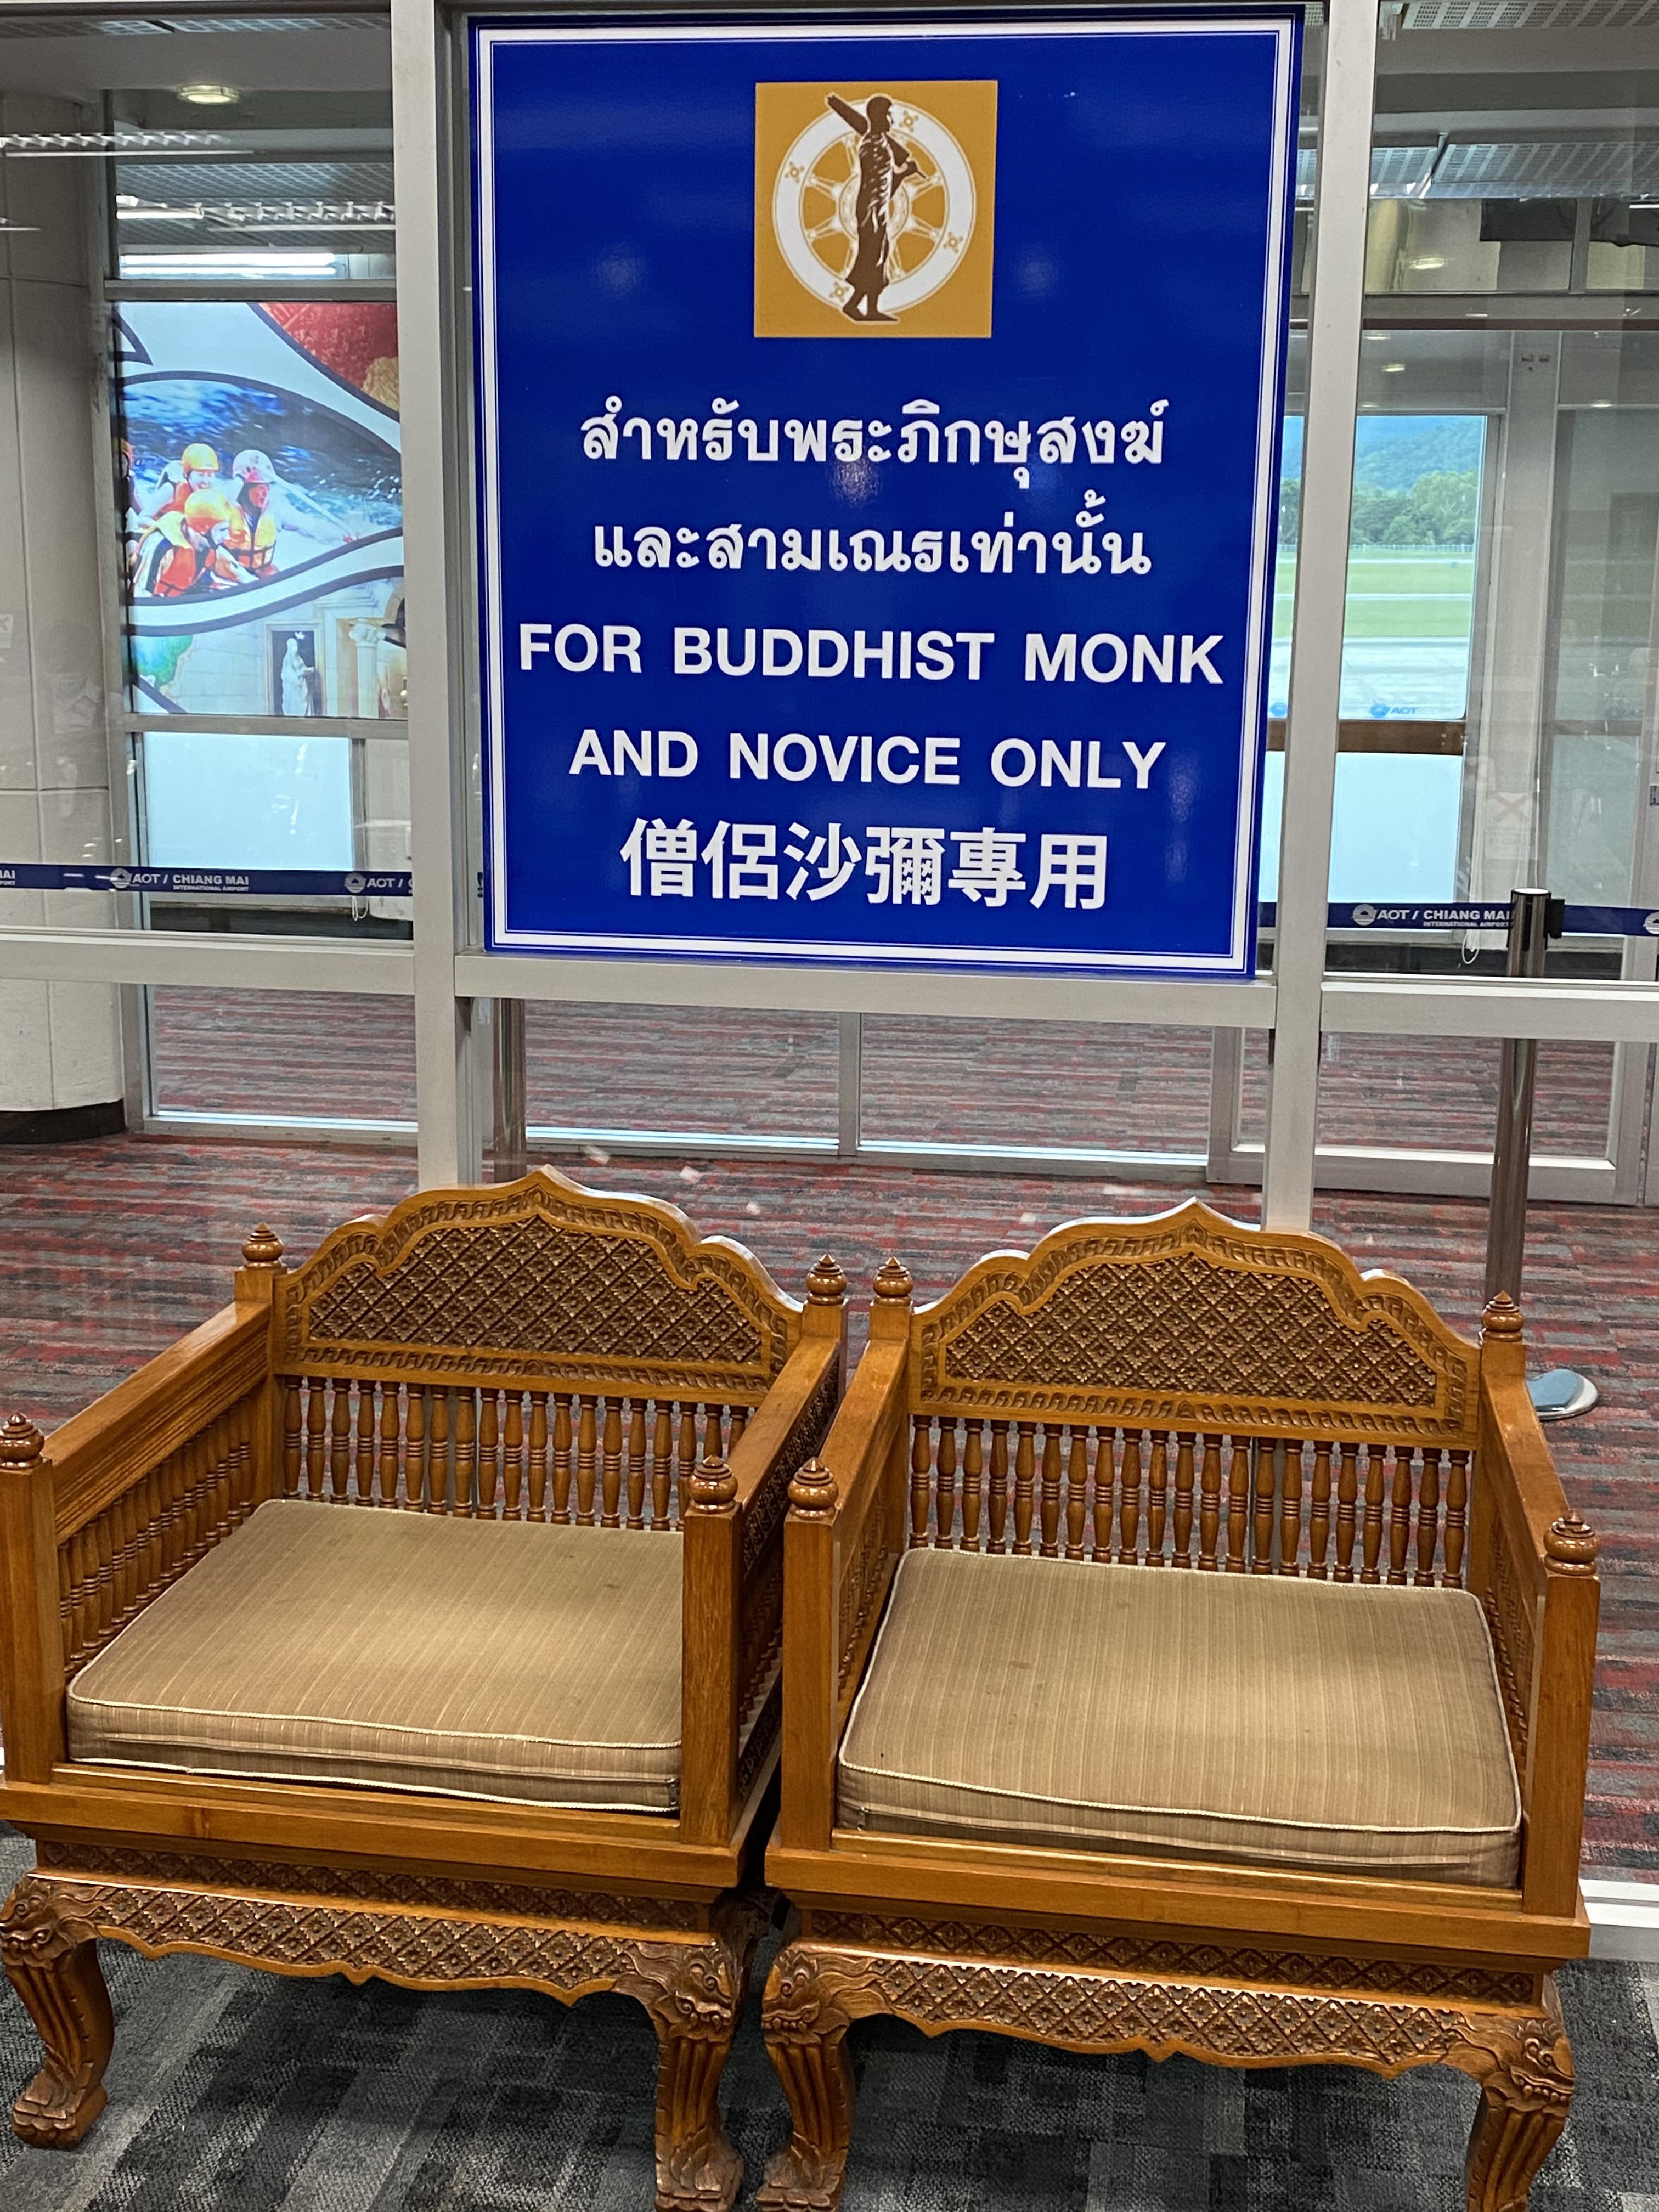 Buddhist monks get special seats at Thai airports, apparently.